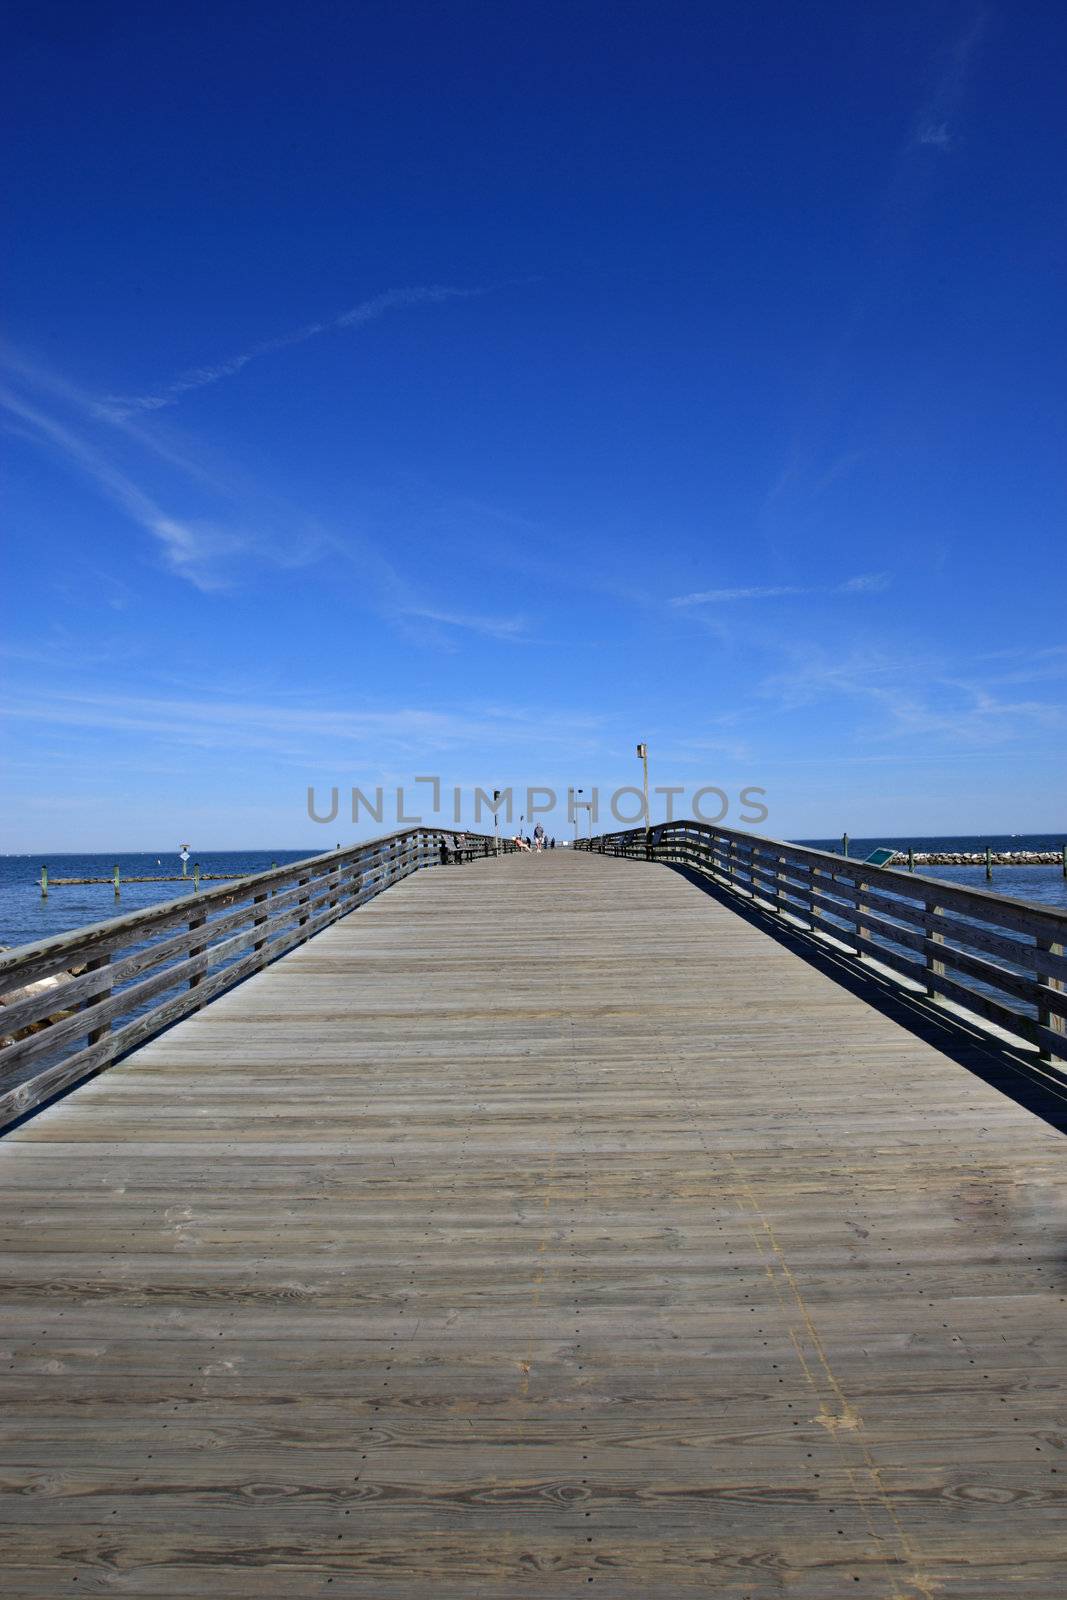 Old wooden pier going into the ocean with a blue sky